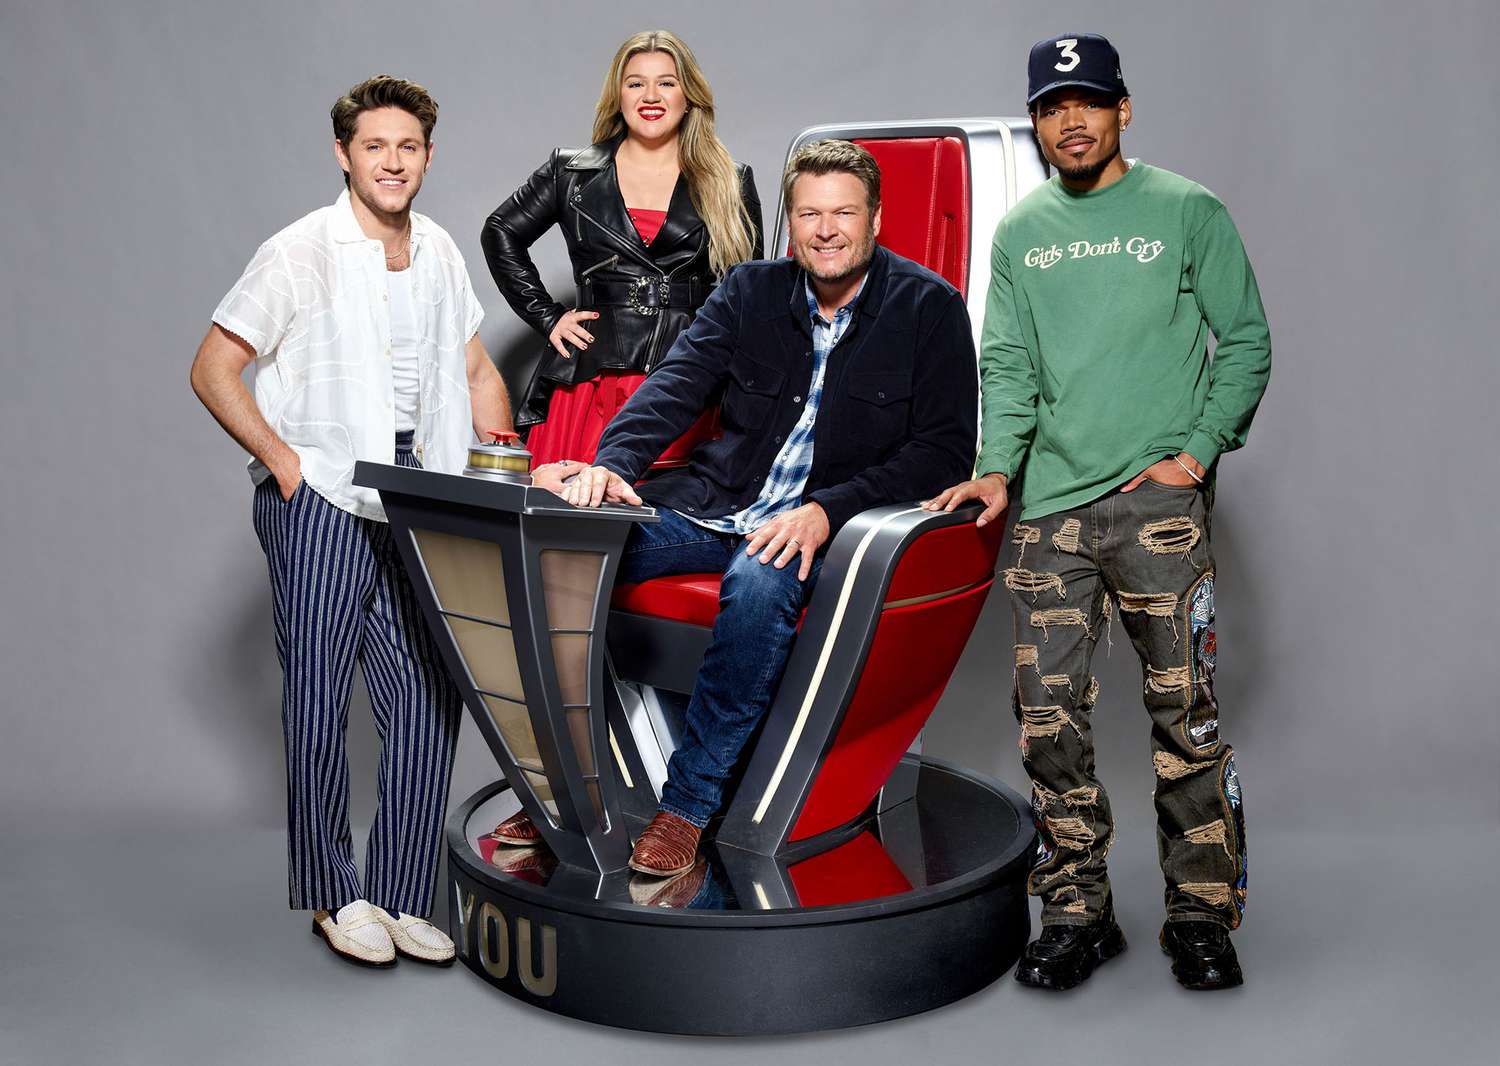 THE VOICE -- Season: 23 -- Pictured: (l-r) Niall Horan, Kelly Clarkson, Blake Shelton, Chance the Rapper